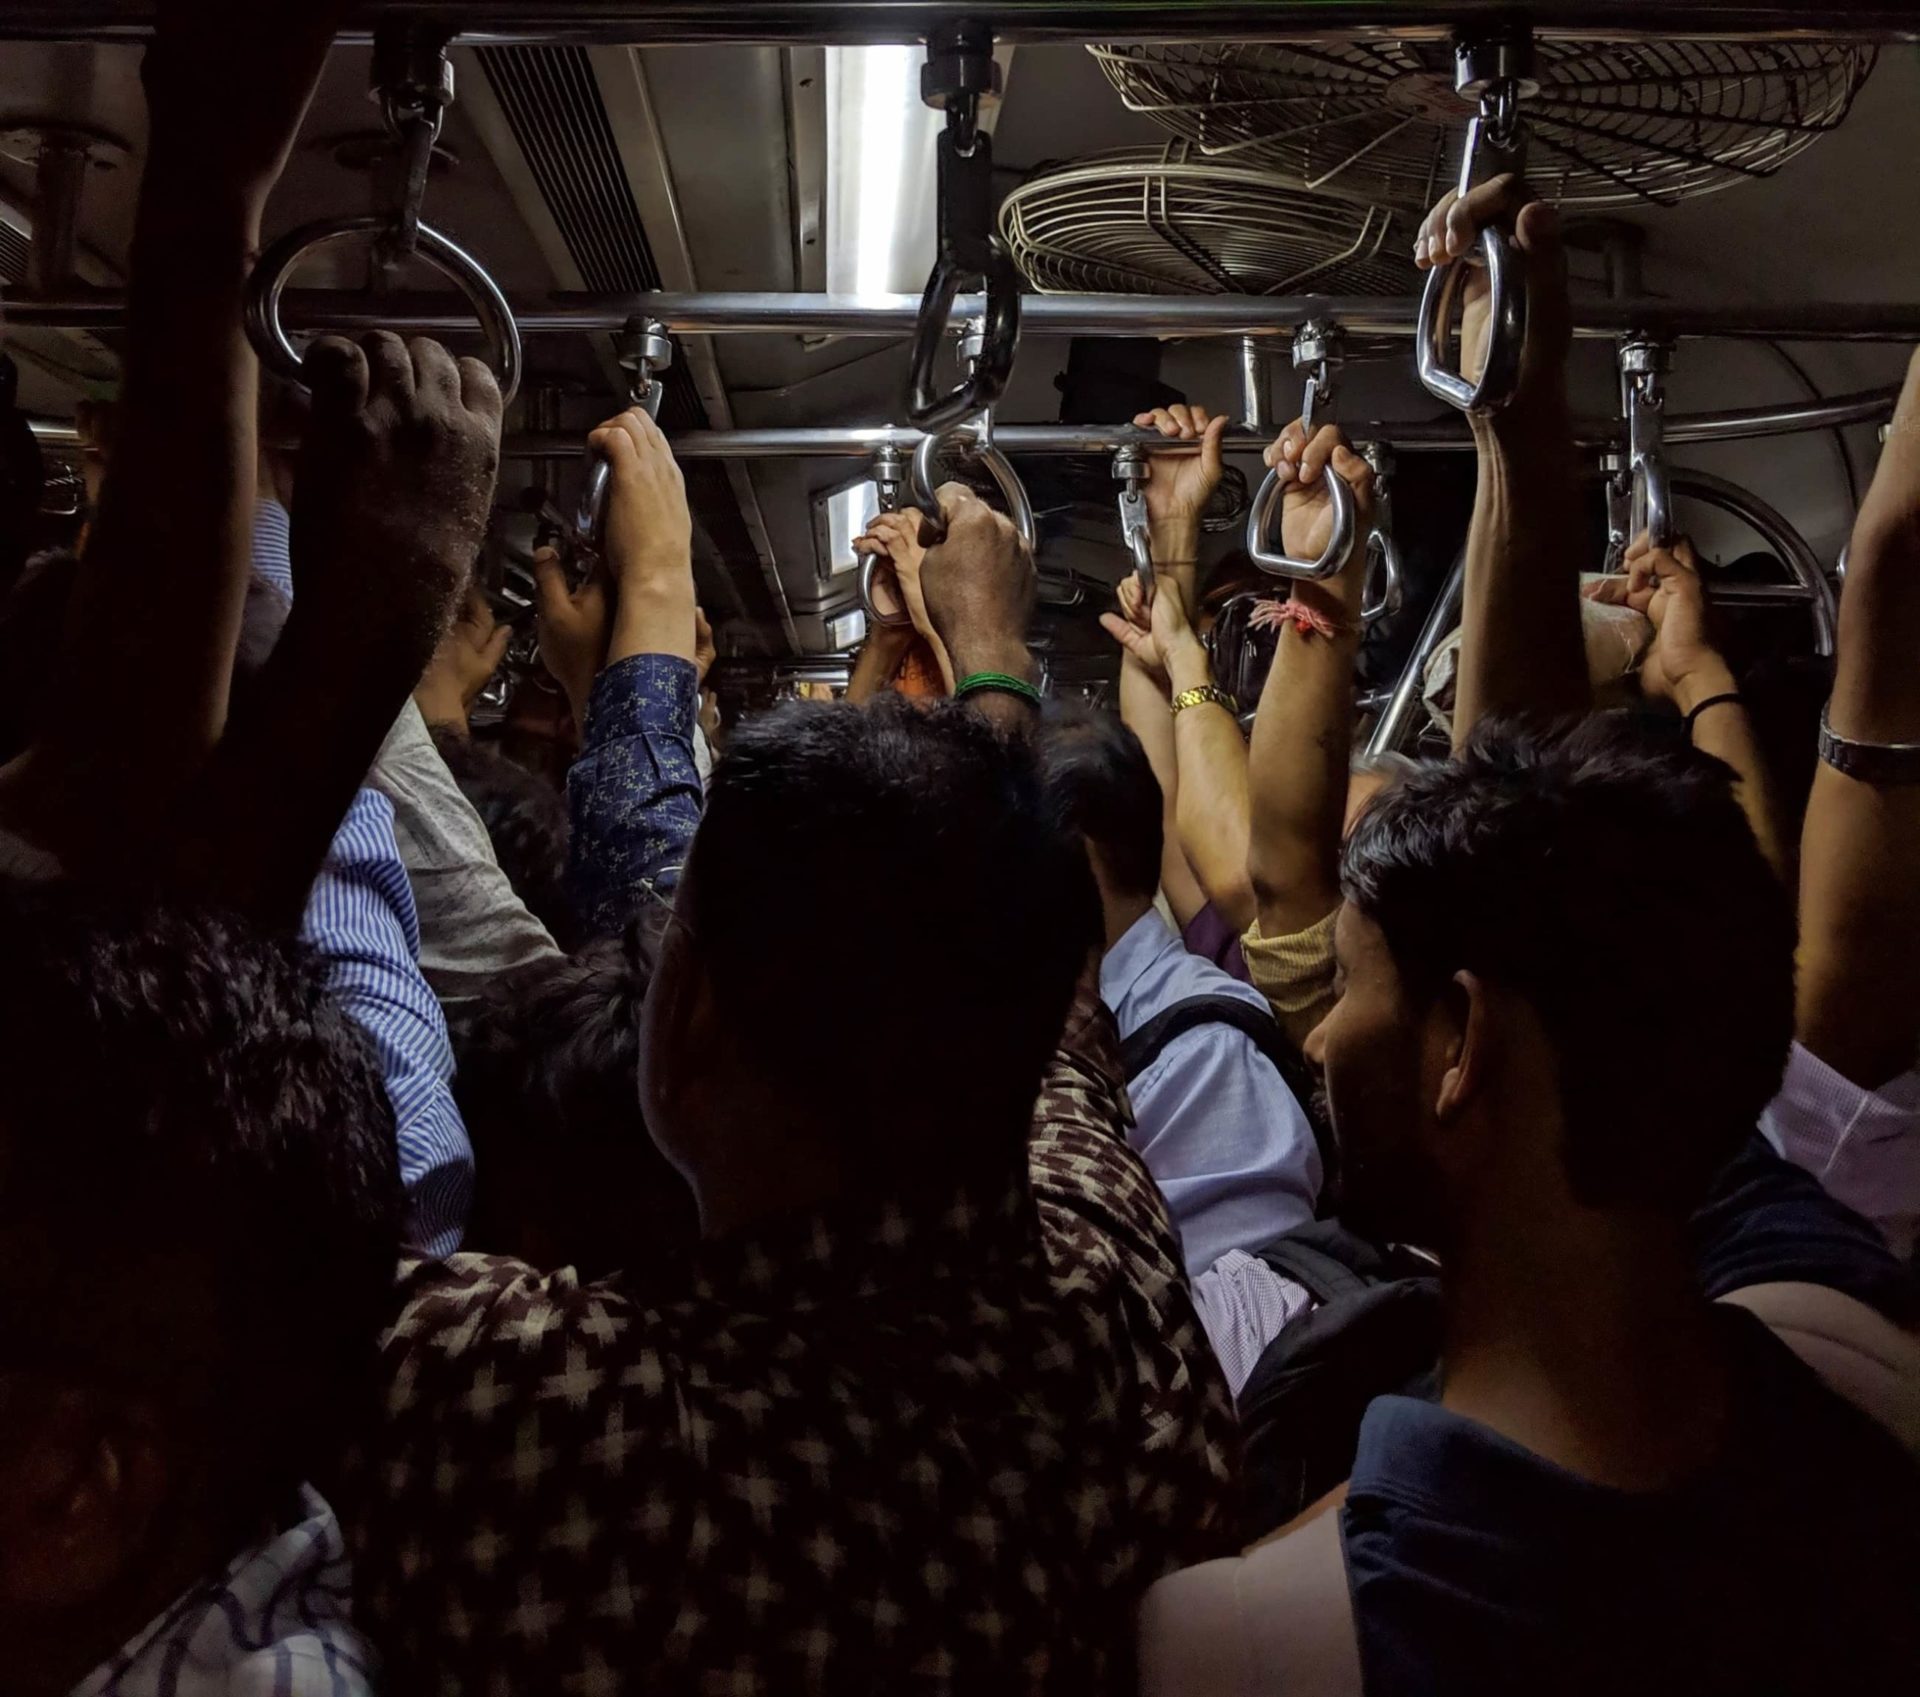 Just Solutions article by Arjun Makhijani featured image of a dark bus with people holding on to the ceiling handles